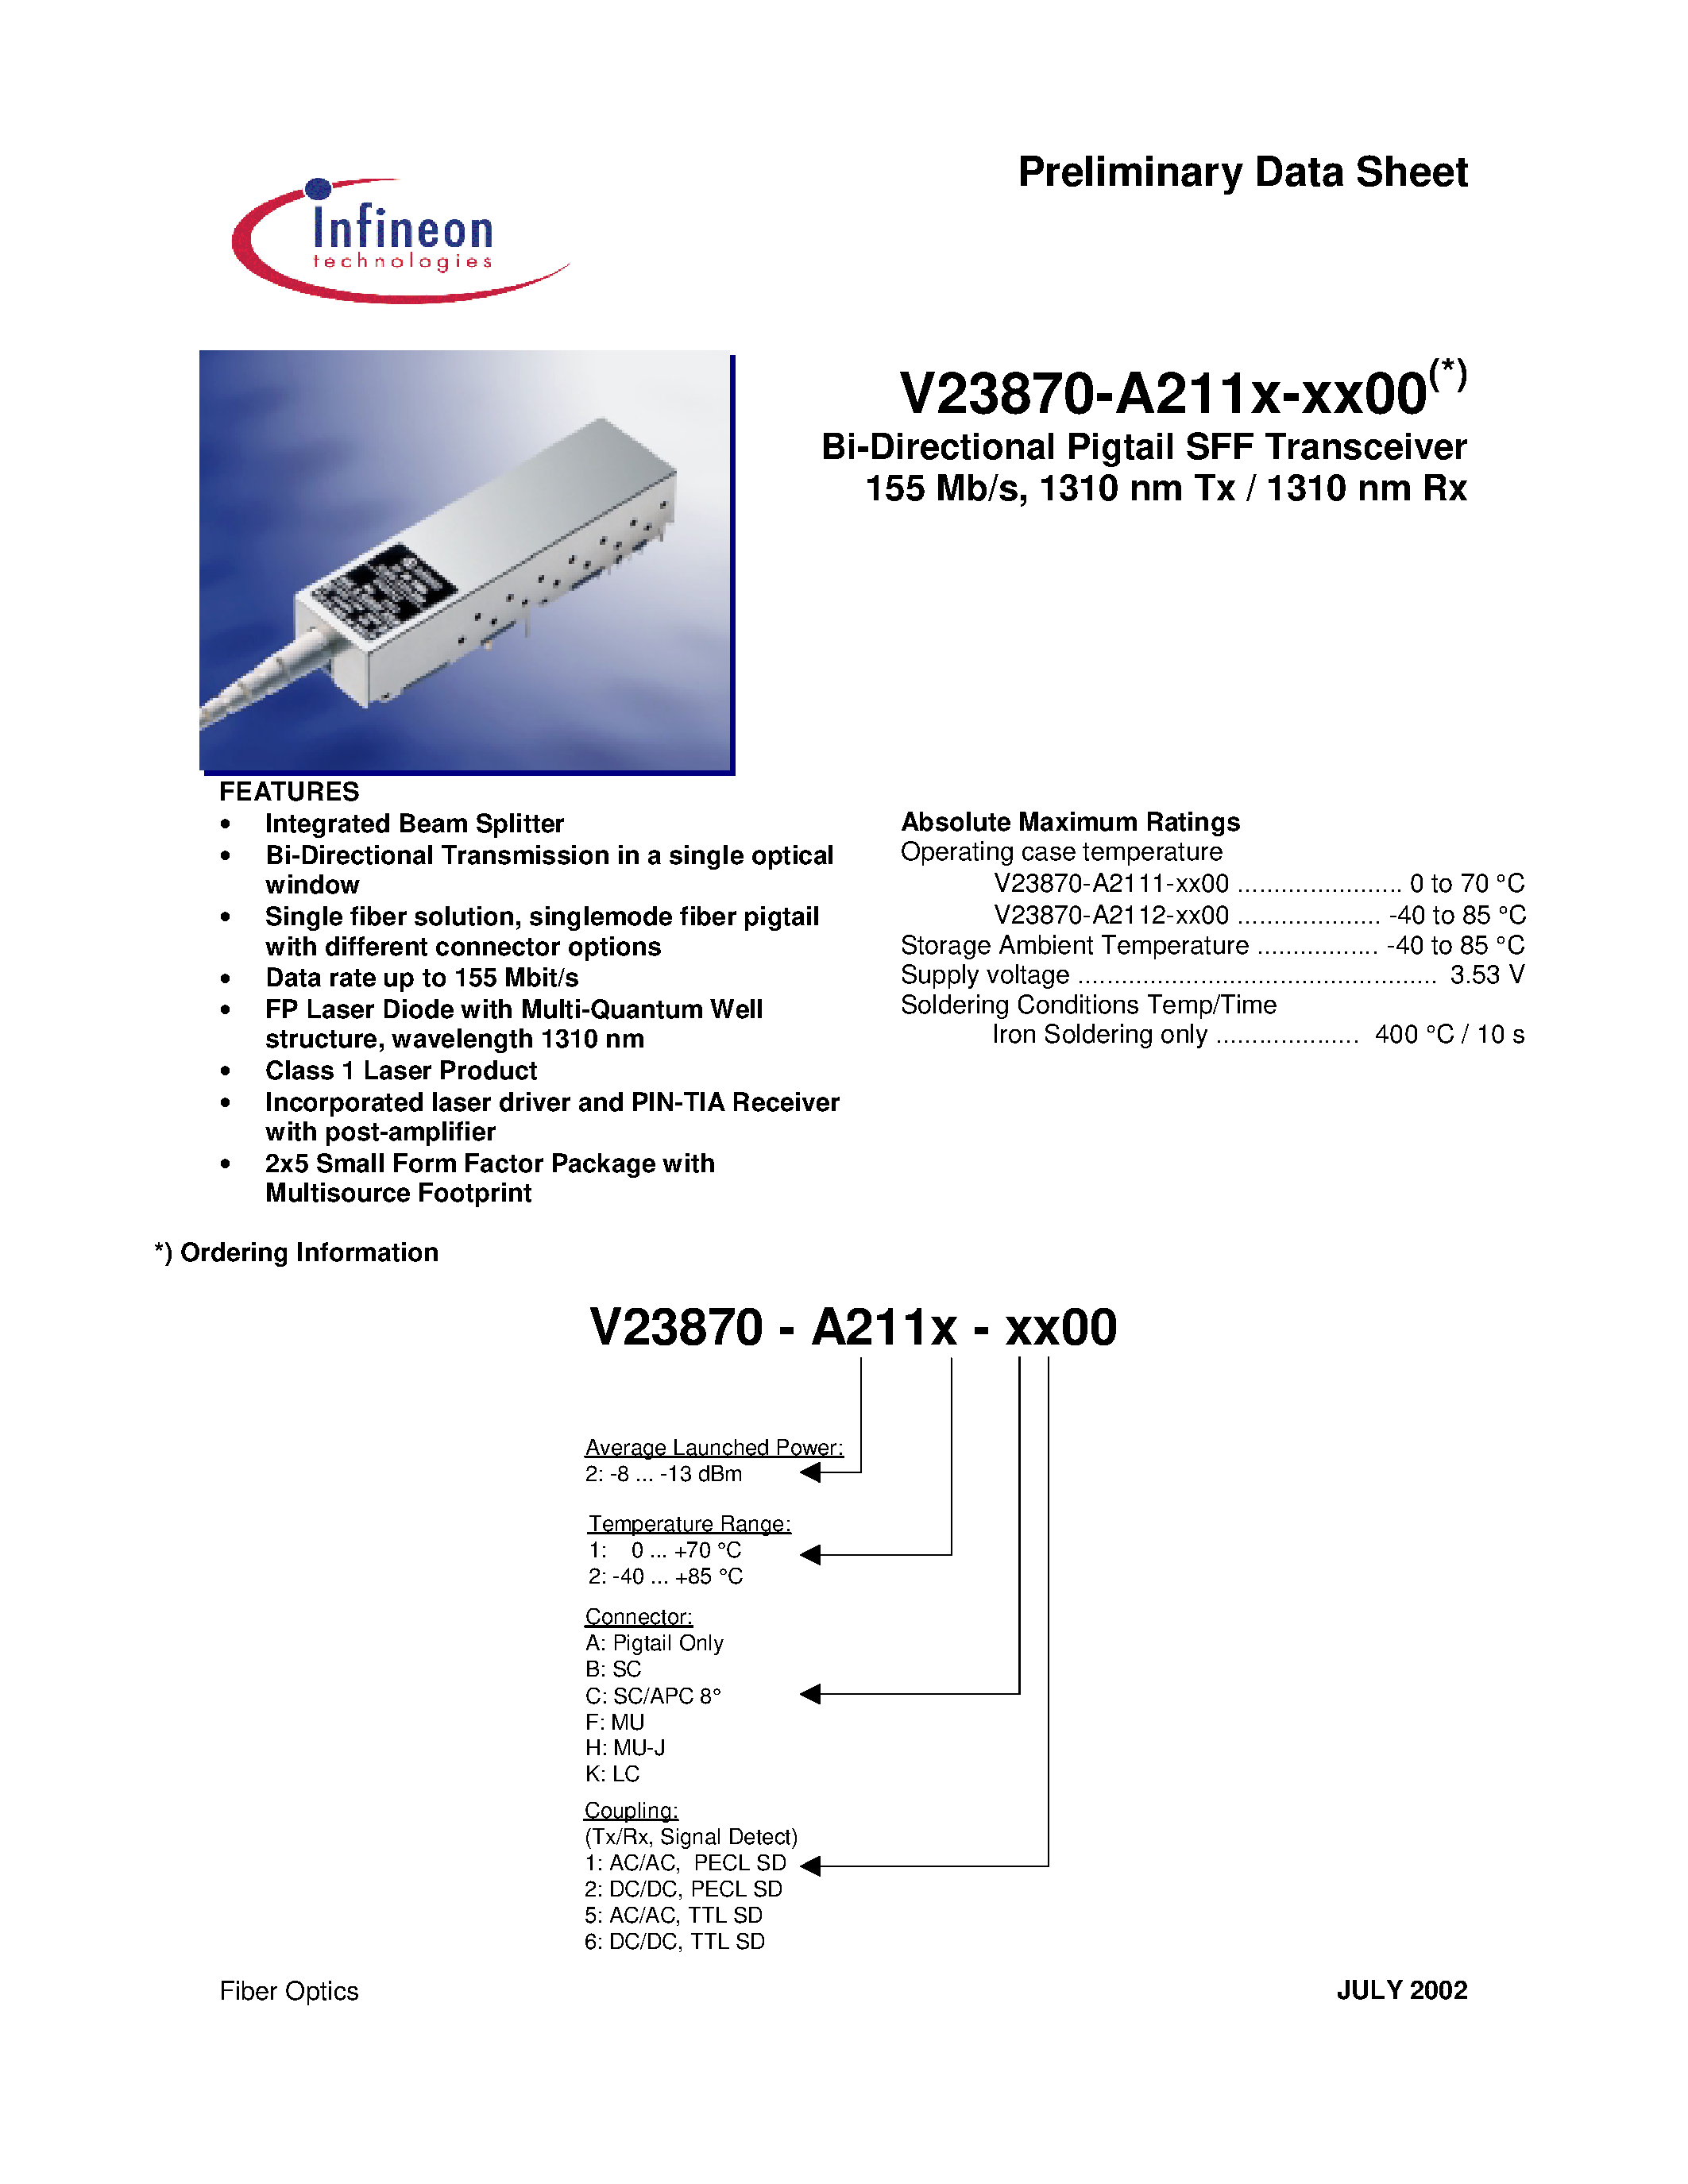 Datasheet V23870-A2111-B600 - Bi-Directional Pigtail SFF Transceiver 155 Mb/s/ 1310 nm Tx / 1310 nm Rx page 1